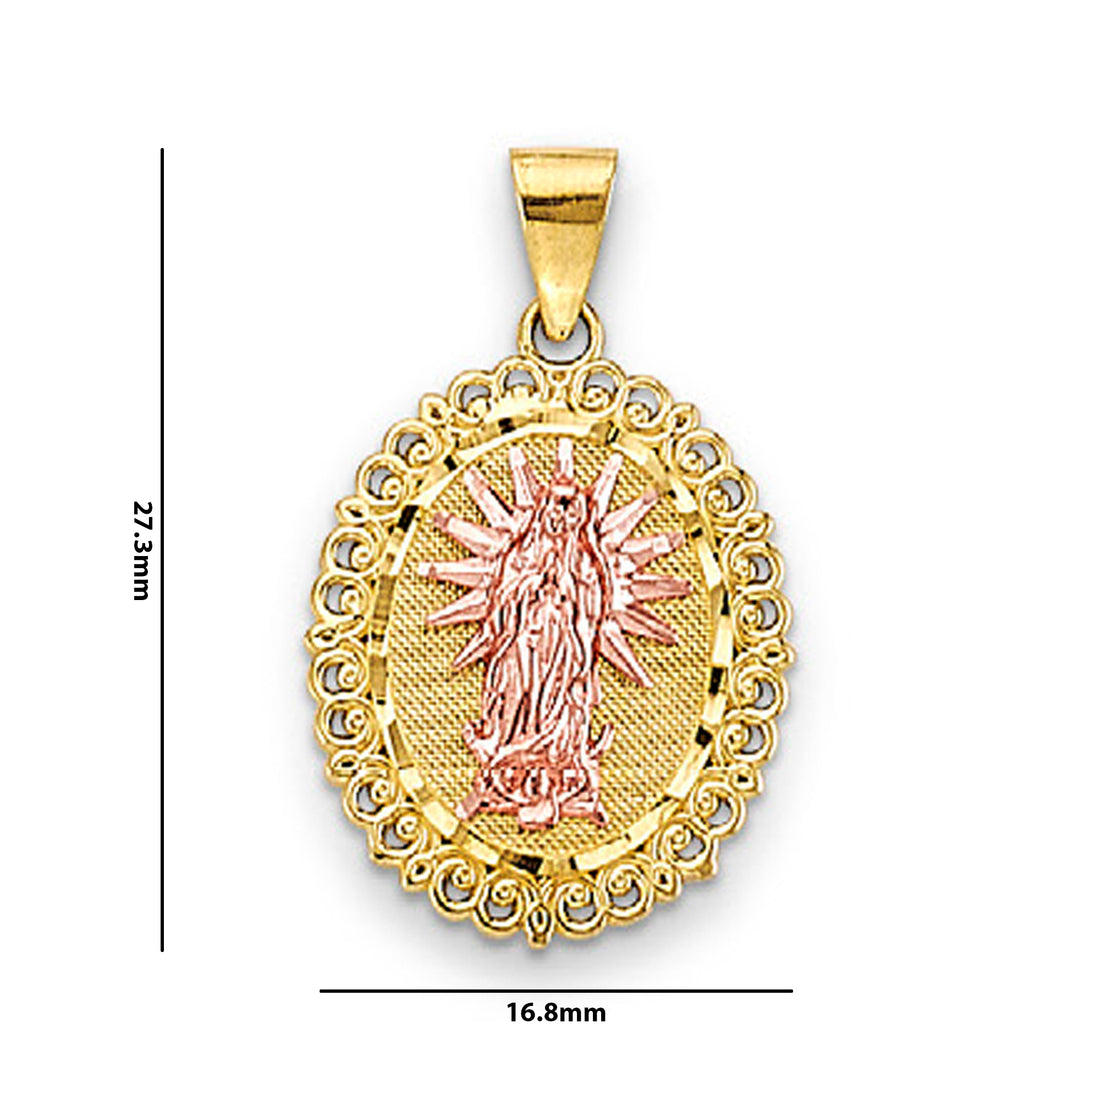 Two Tone Gold Fancy Border Oval Lady of Guadalupe Pendant with Measurement